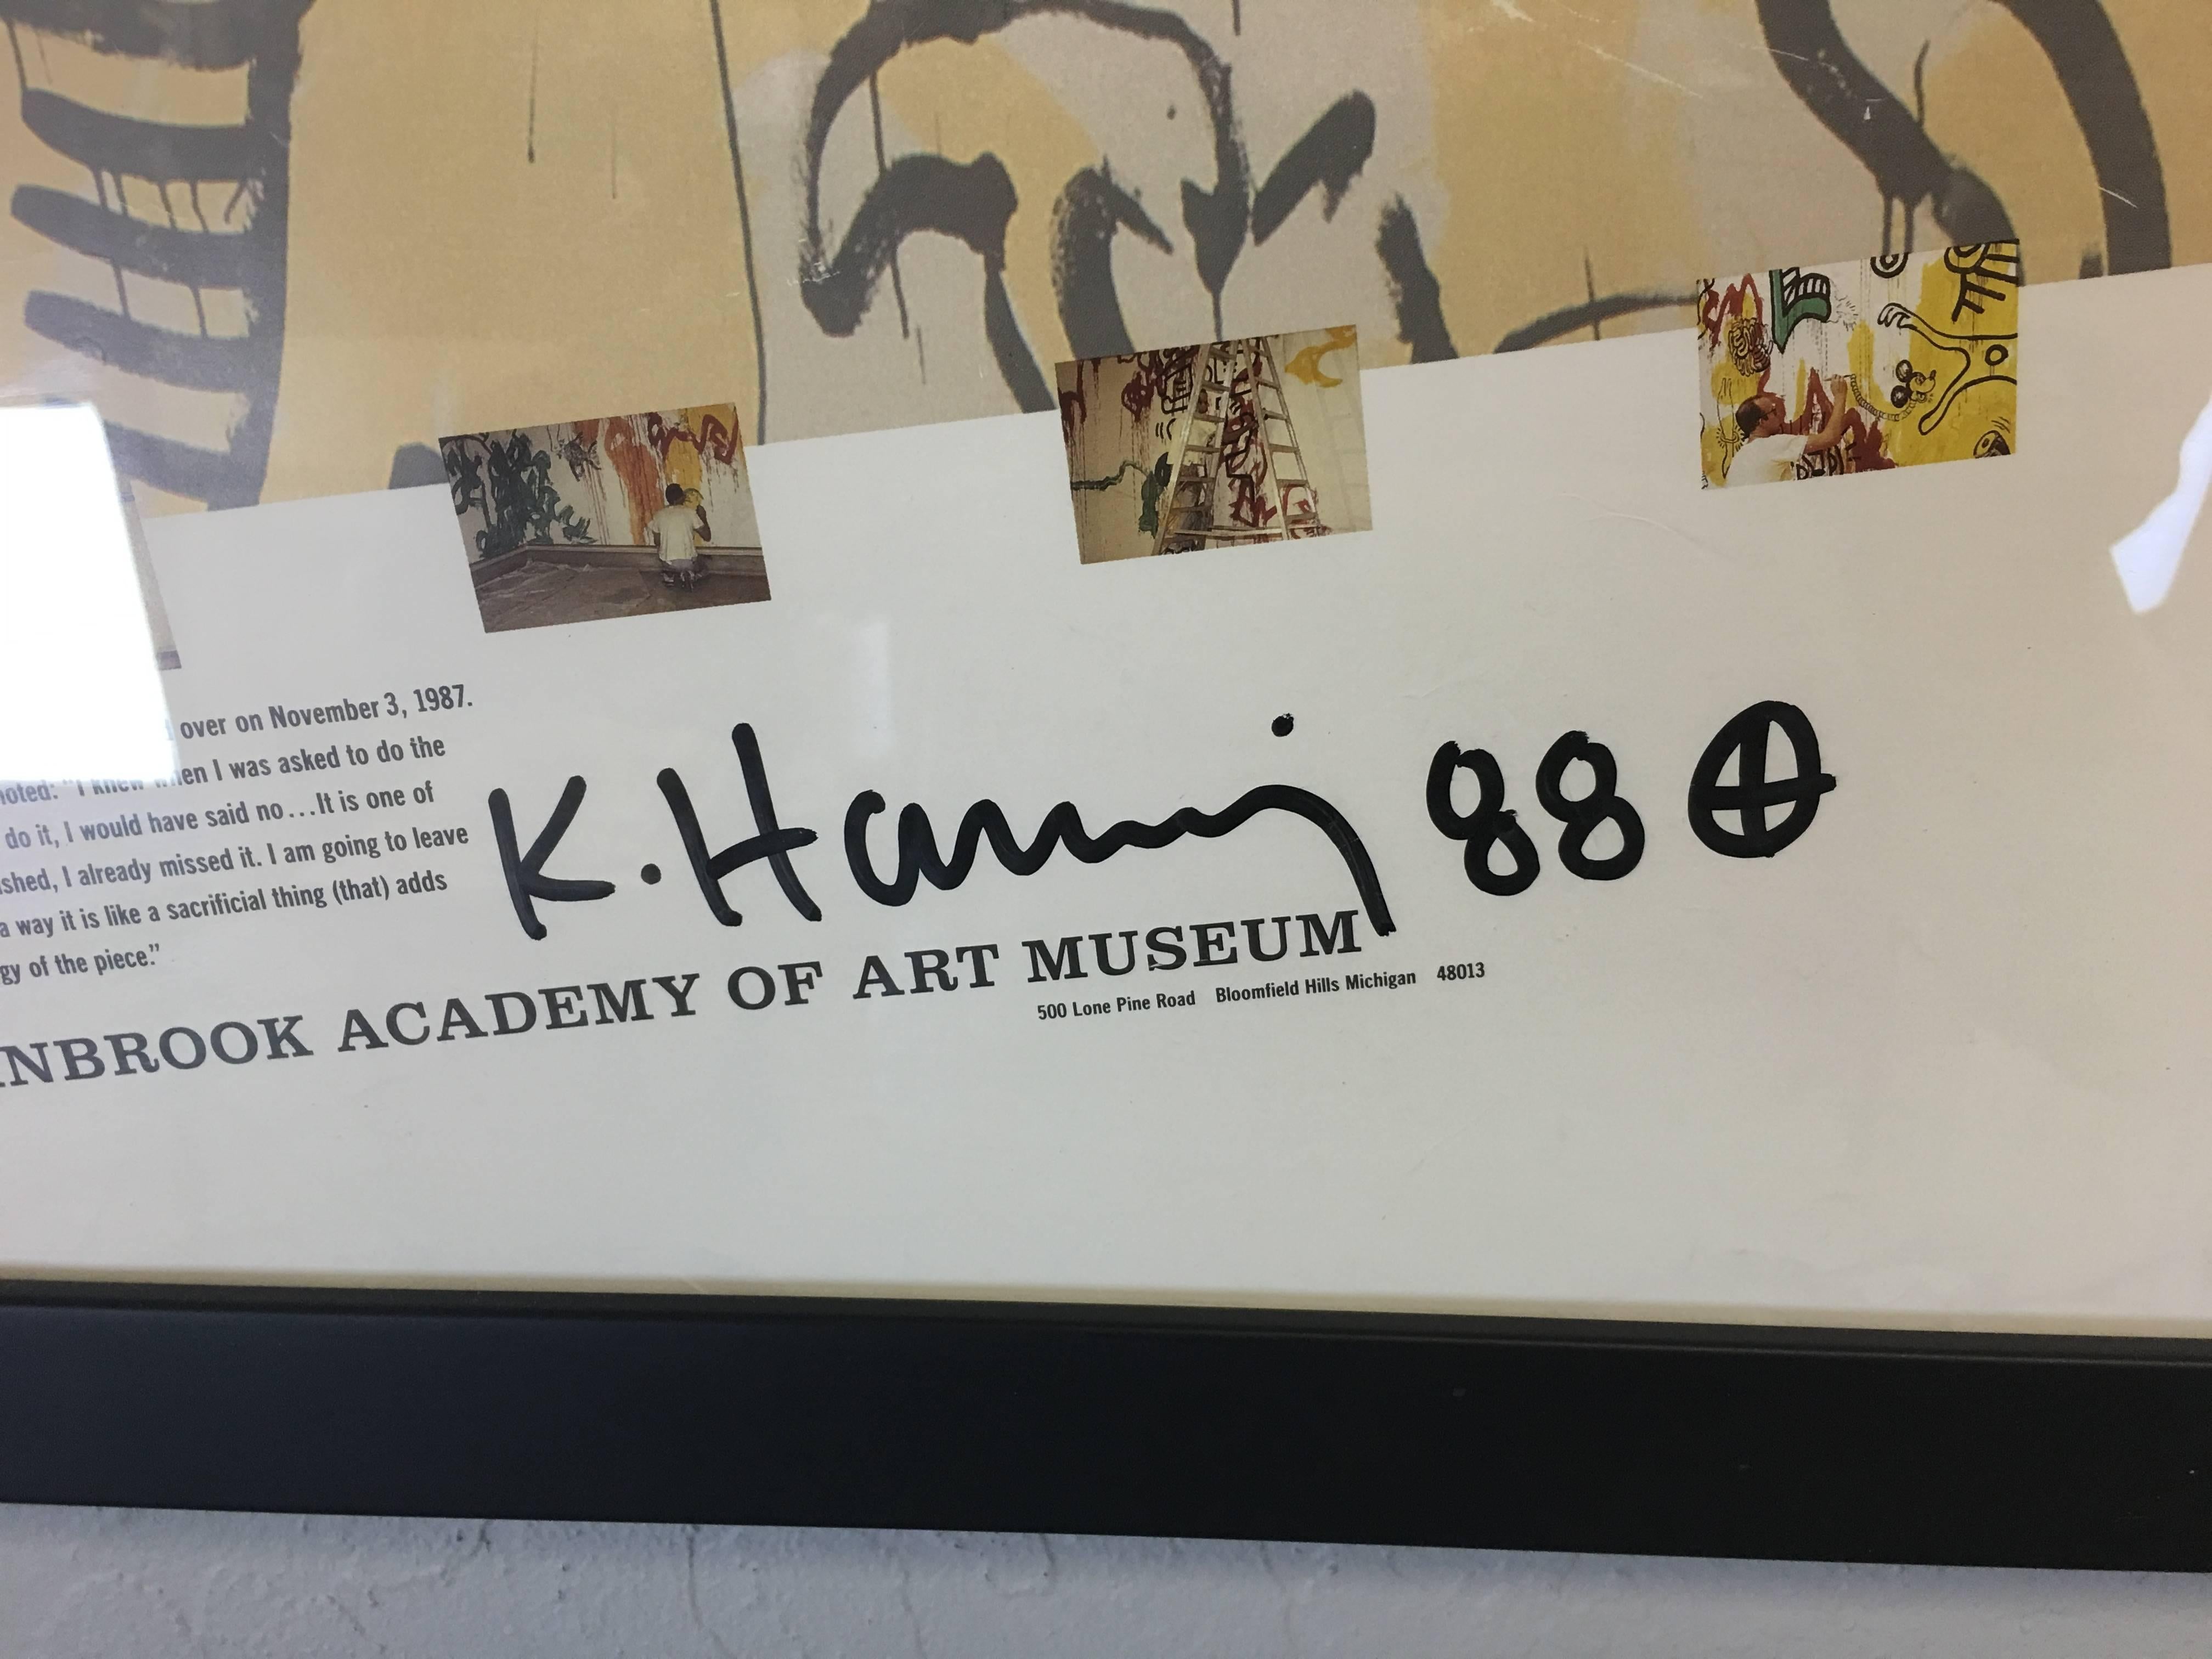 Signed Cranbrook Academy of Art Museum. Signed by Keith Haring in sharpie and dated 1988. The poster depicts the mural Haring painted on the walls of the North Gallery. Haring claimed this was his best work. It was then painted over and he knew this